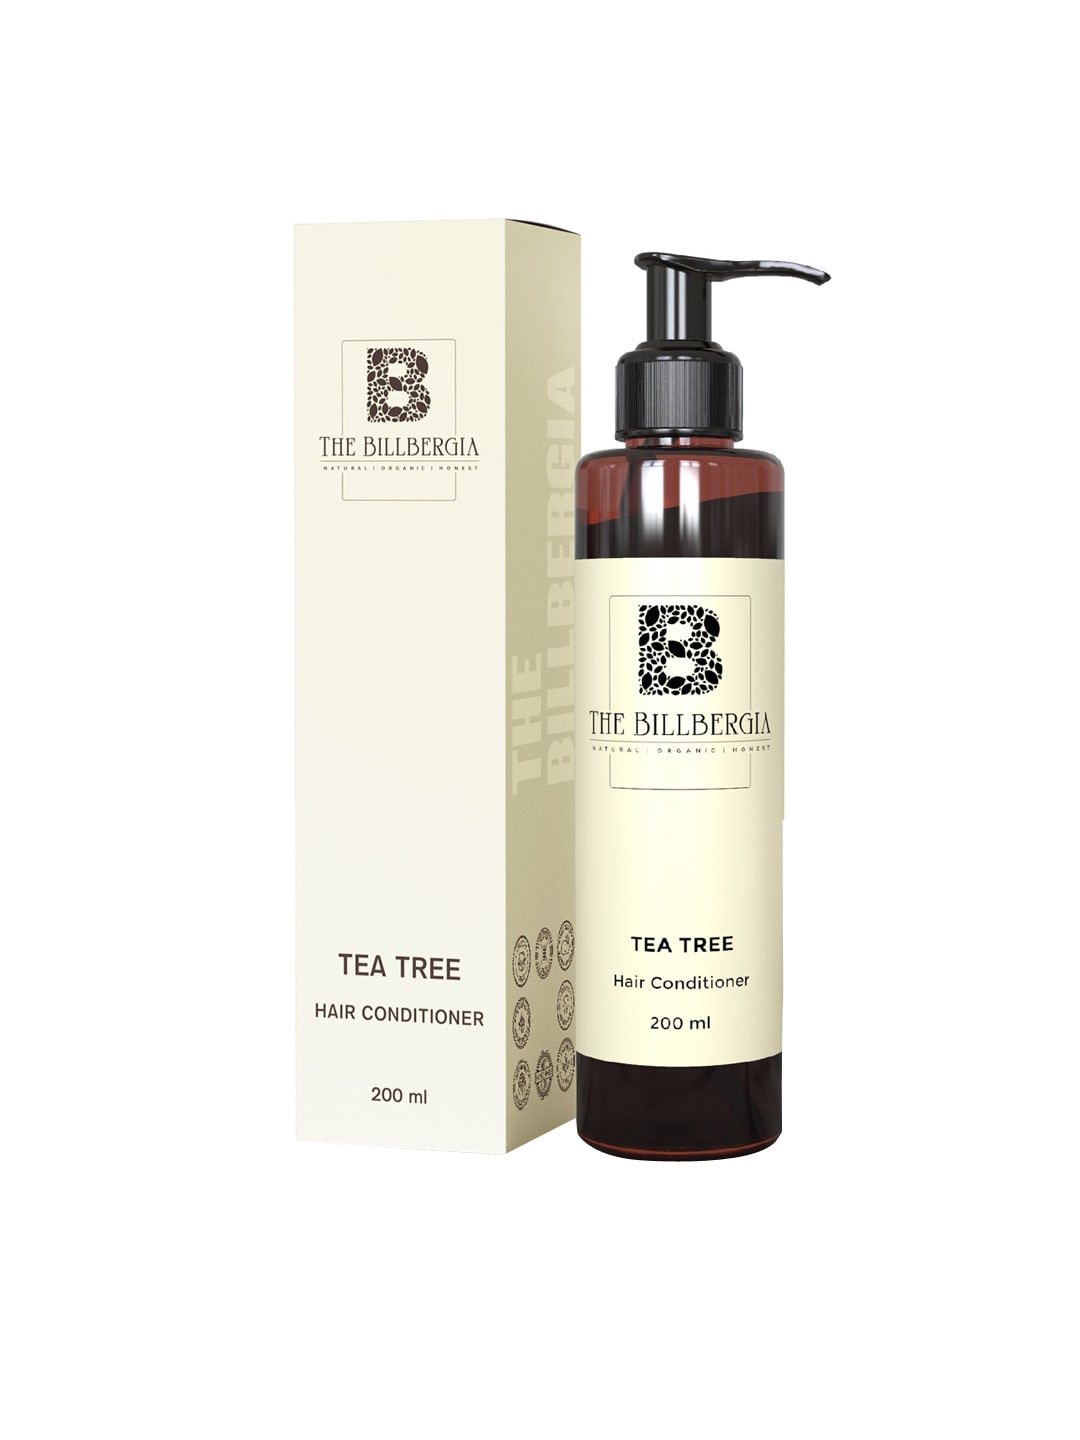 THE BILLBERGIA Tea-Tree Hair Conditioner with Amla 200 ml Price in India